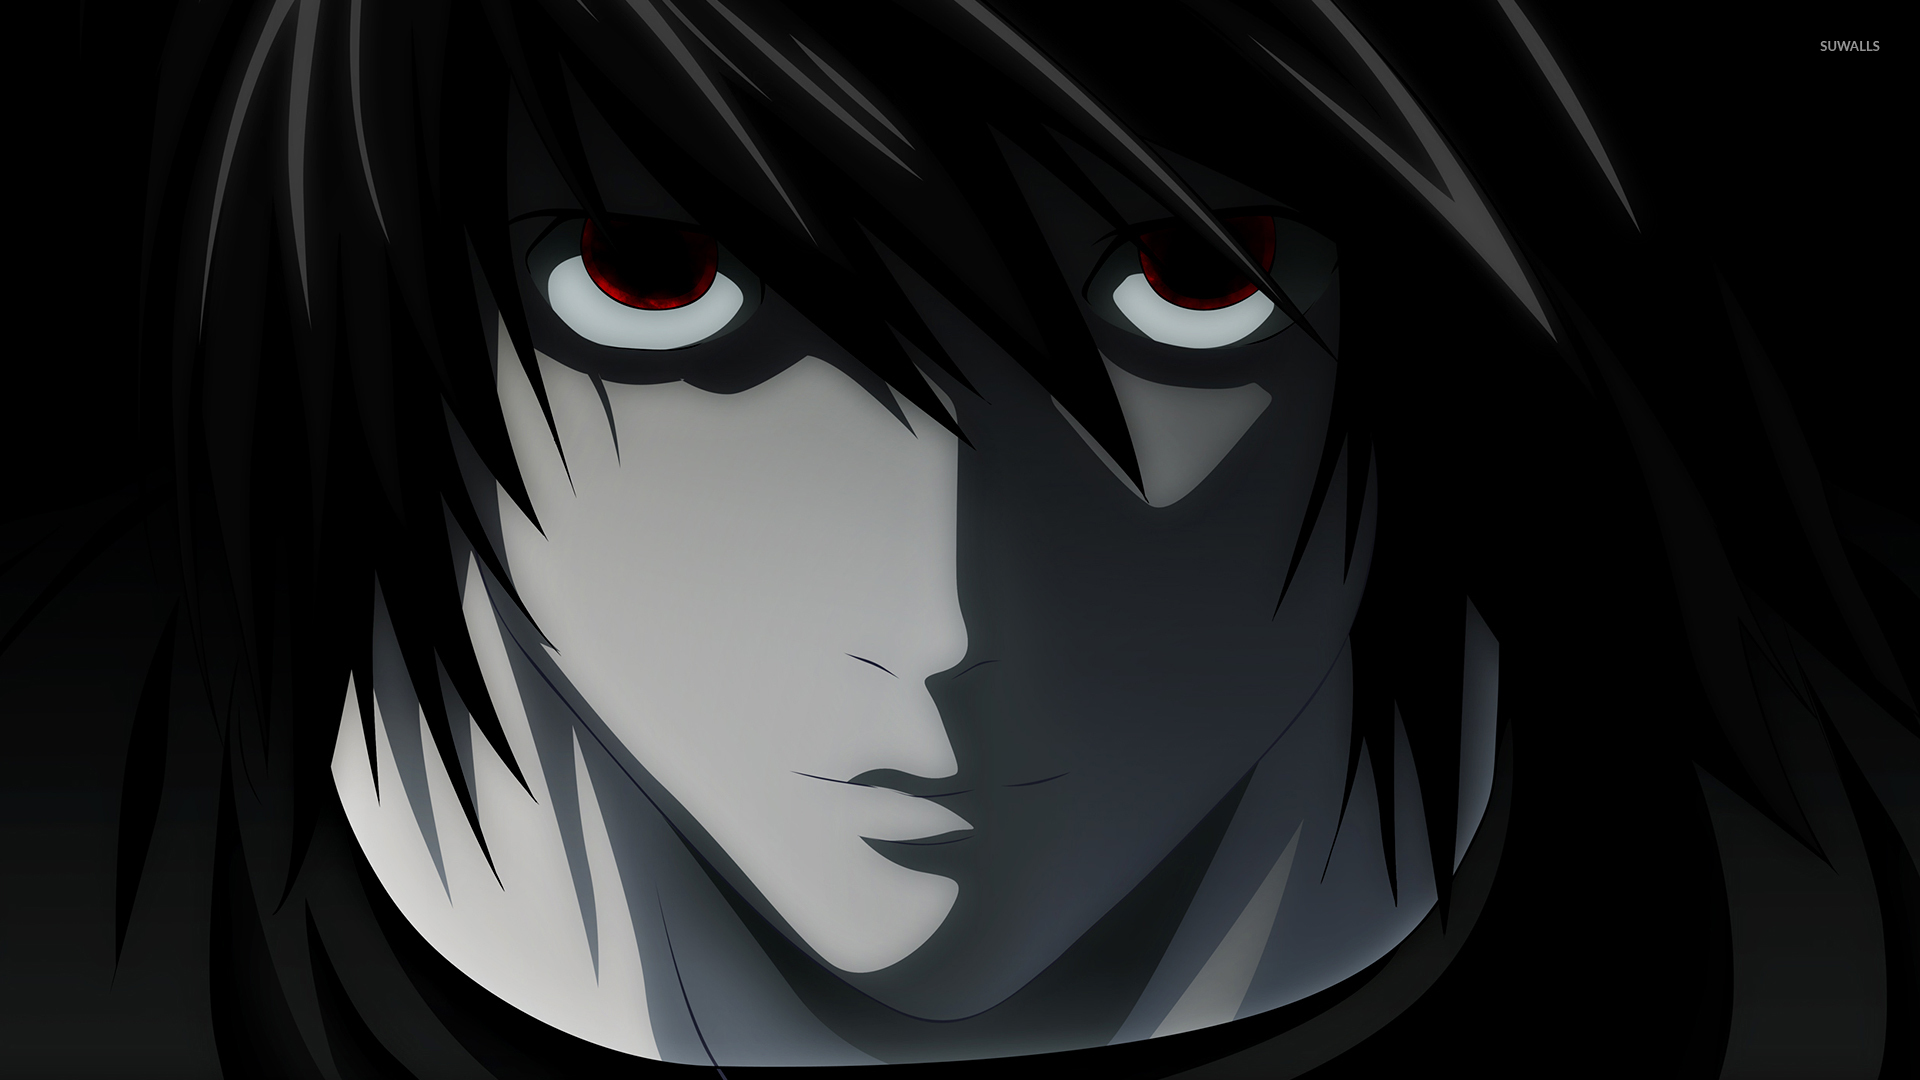 Death Note [4] wallpaper - Anime wallpapers - #6375